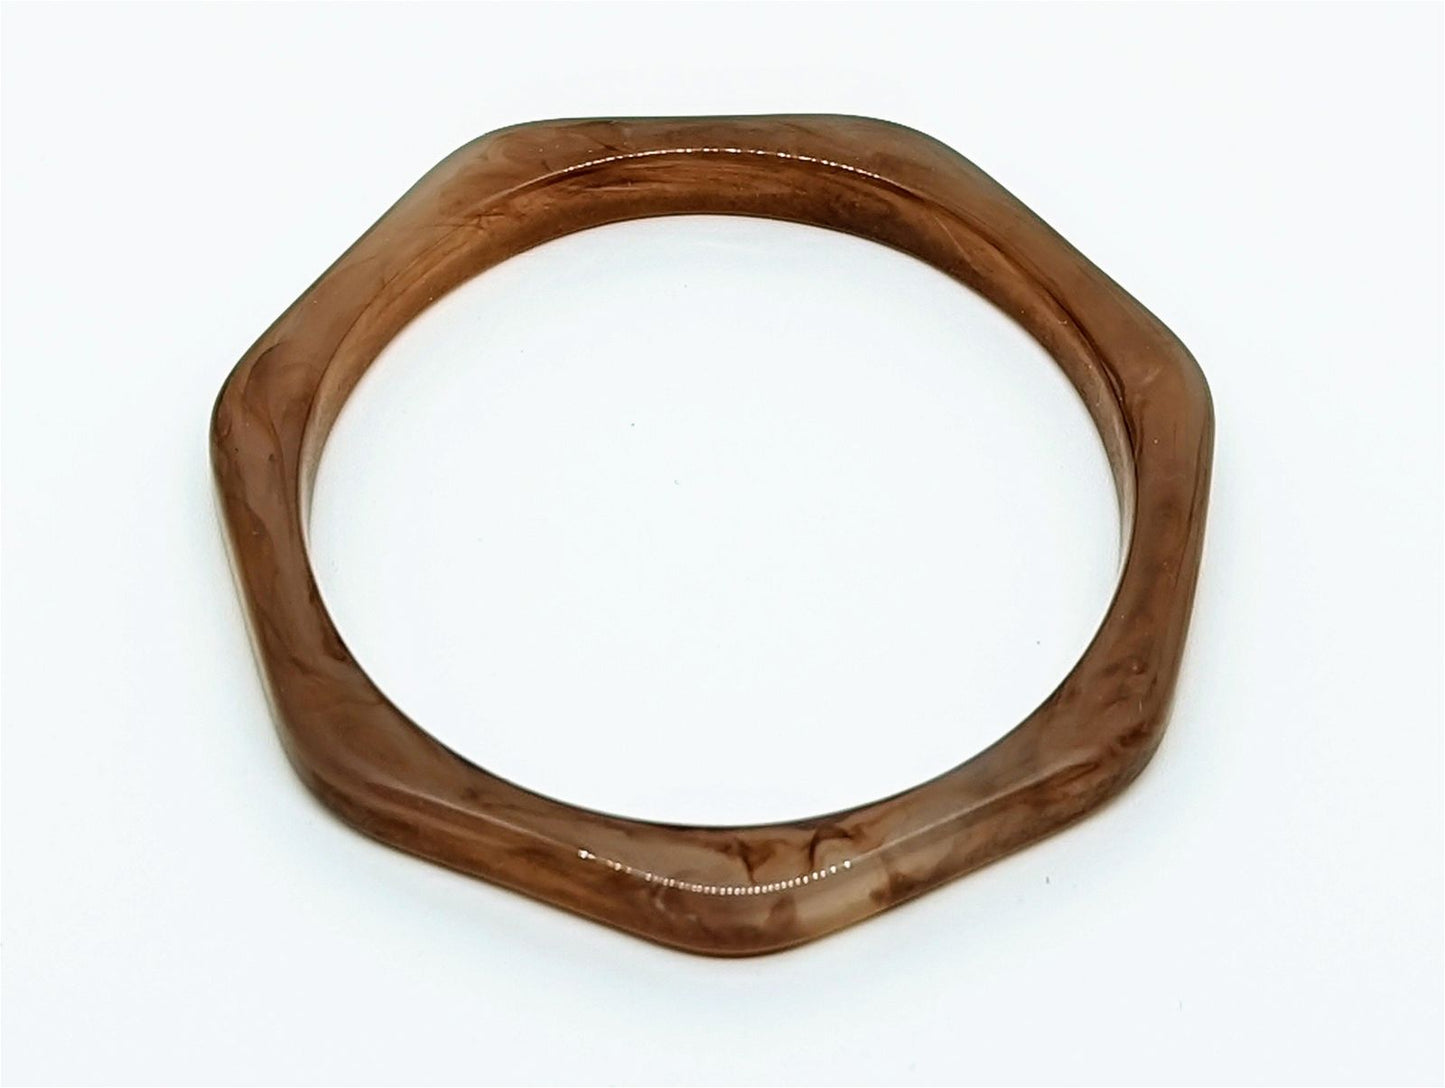 Modern Bangles - Maily's Classic Accessories